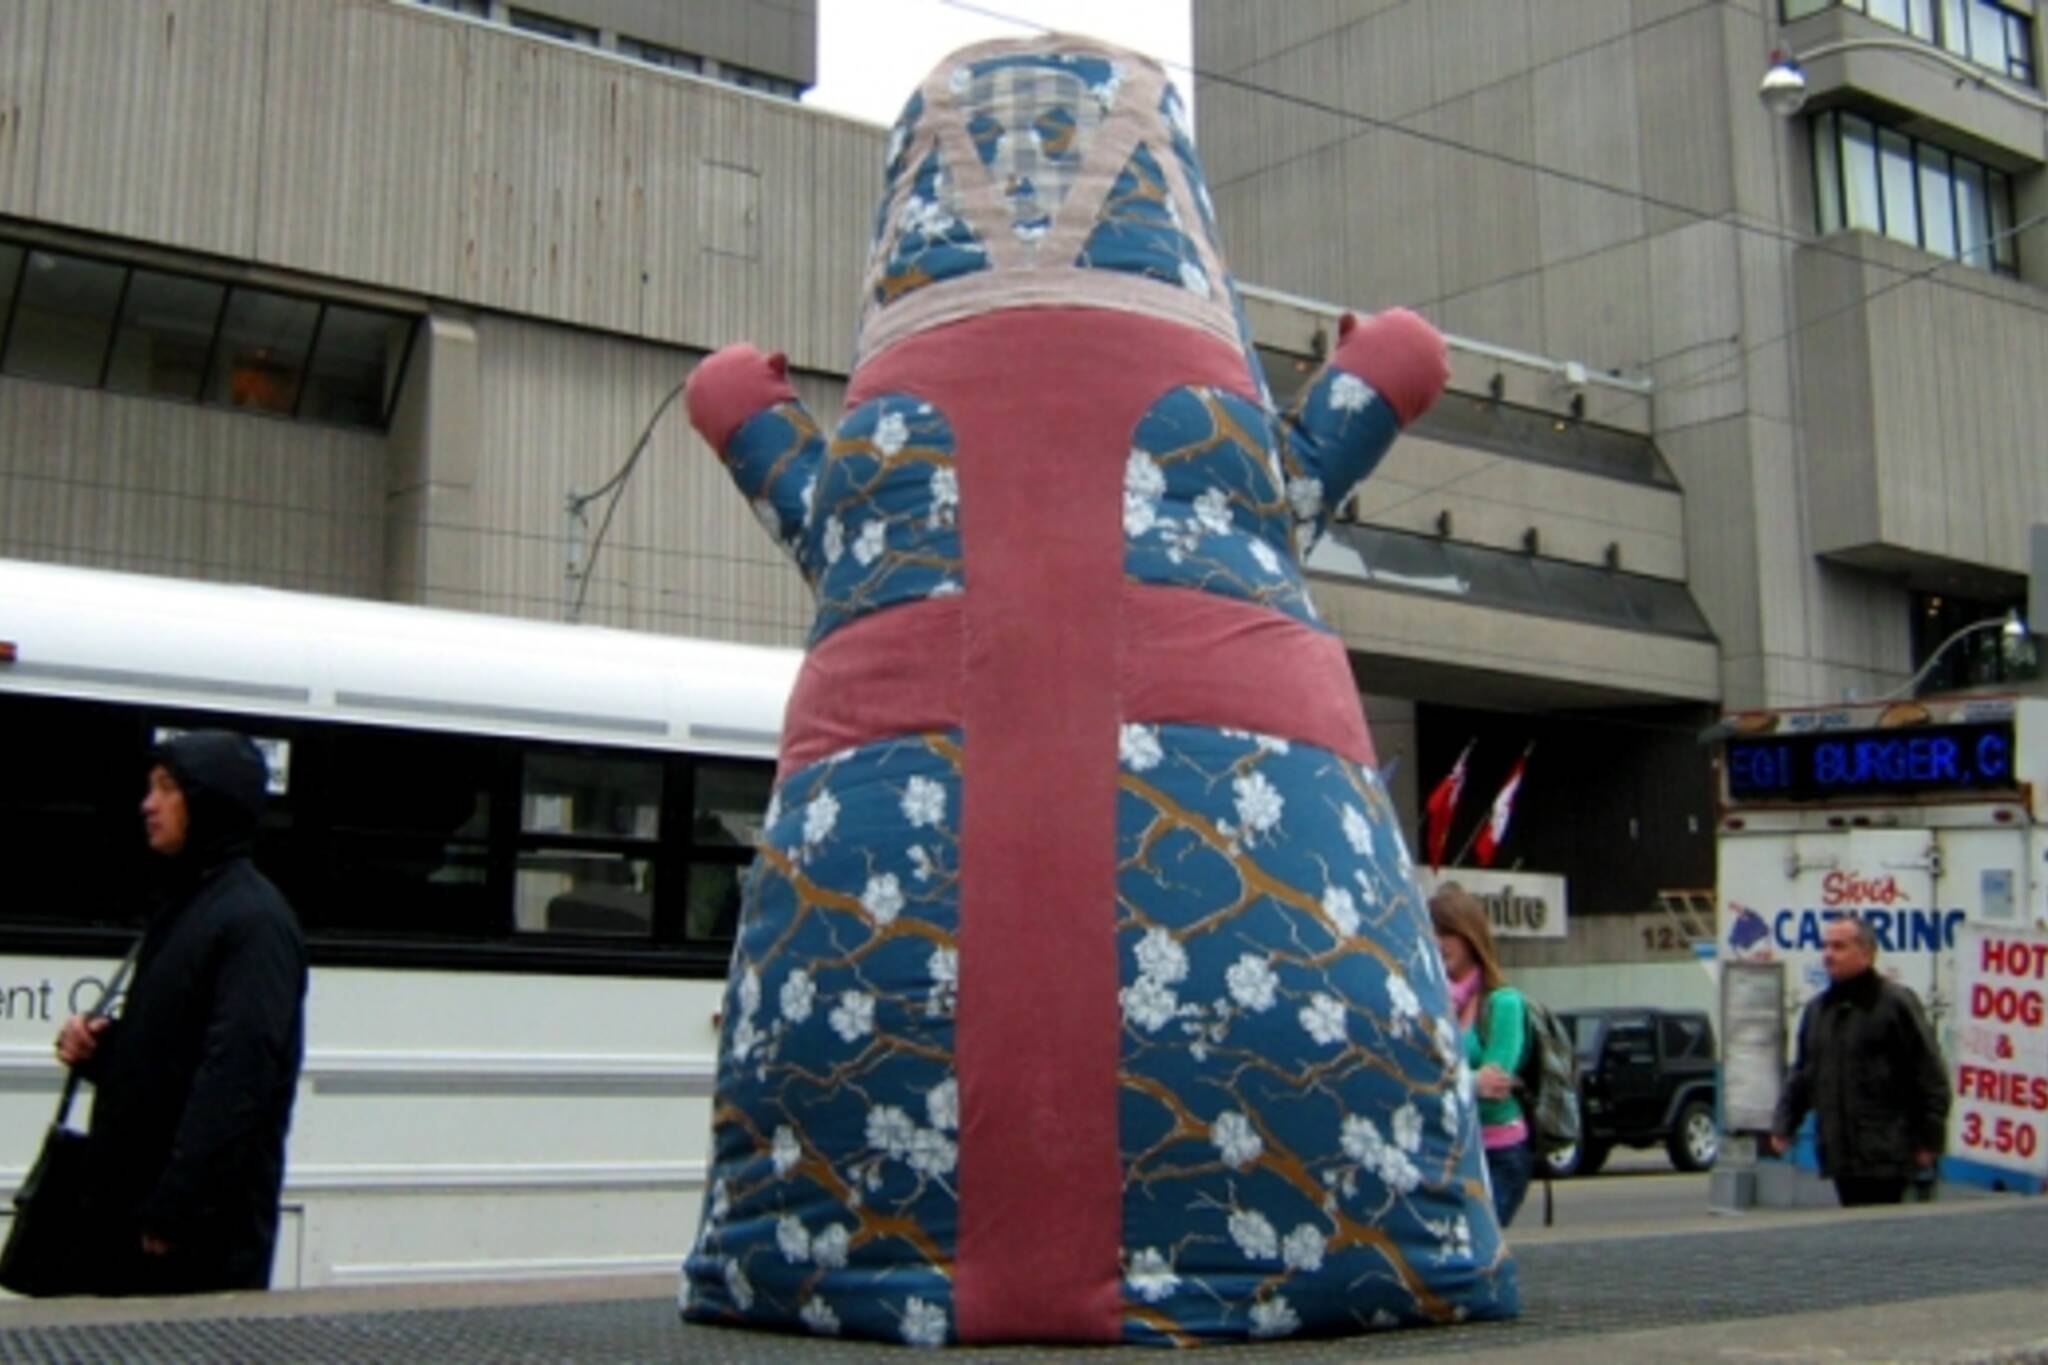 Poster Child's big inflated doll at Nathan Phillips Square